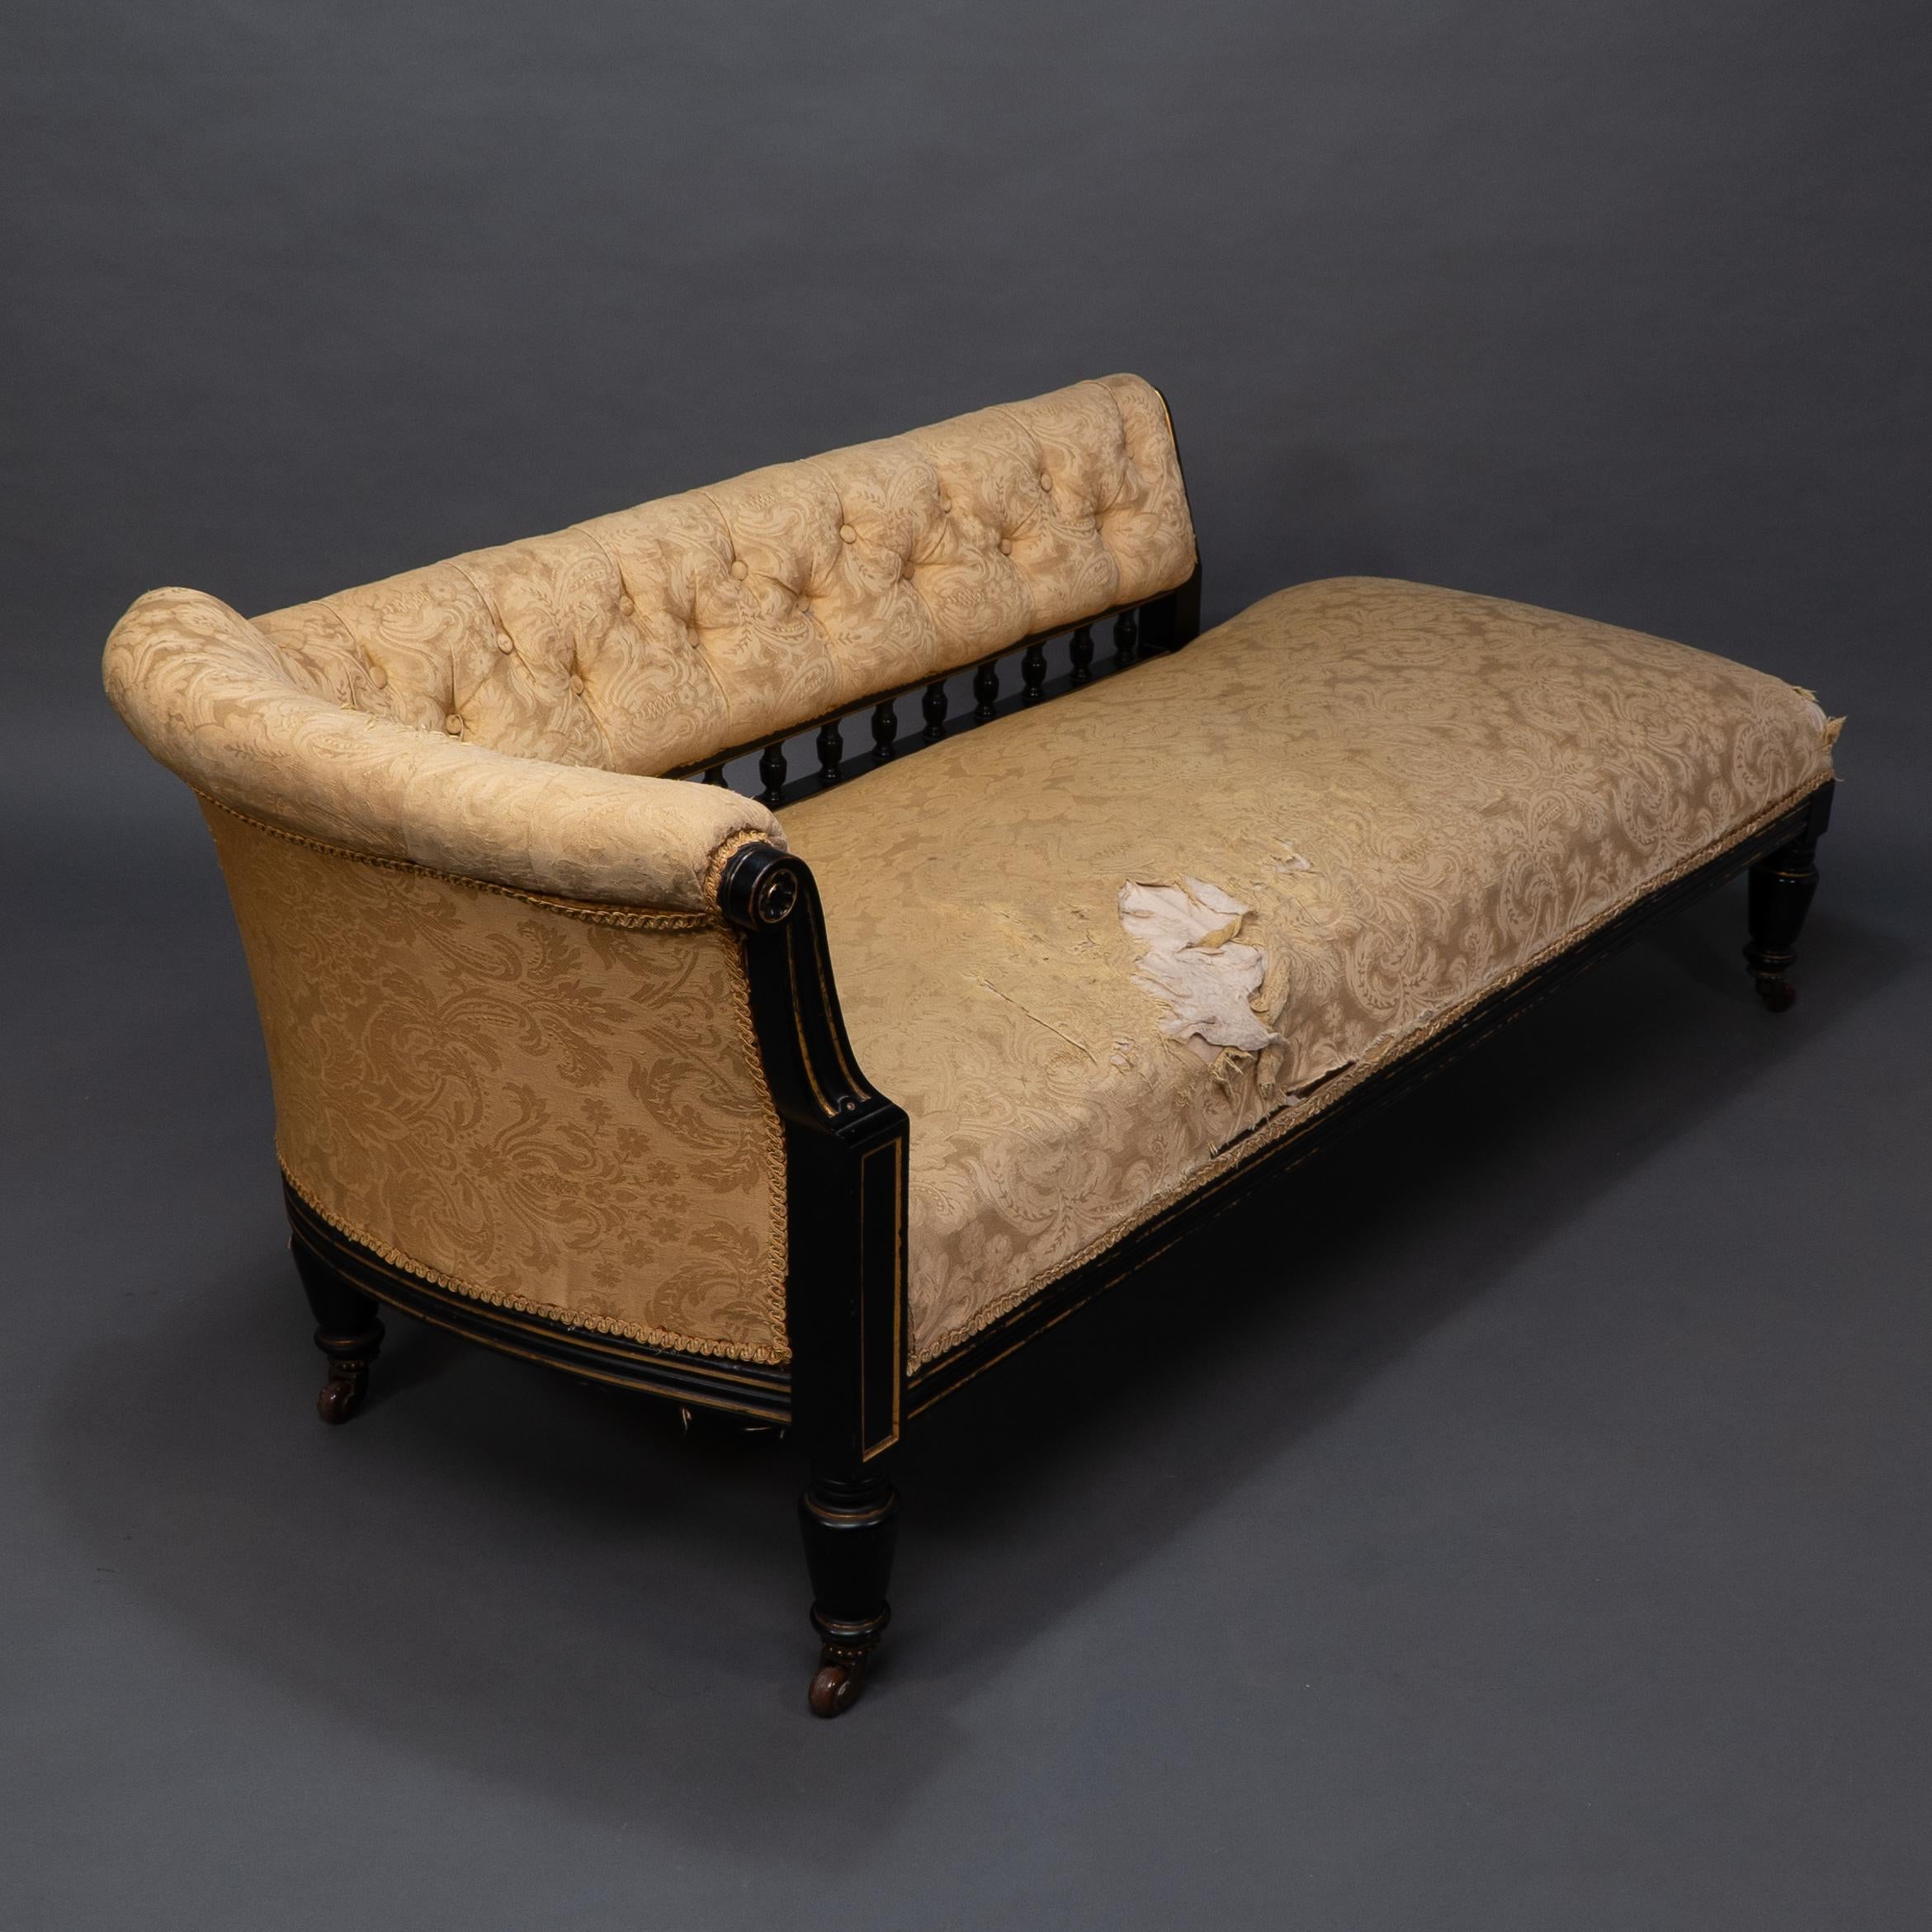 Late 19th Century Charles Bevan. Marsh & Jones. Aesthetic Movement button back chaise lounge For Sale